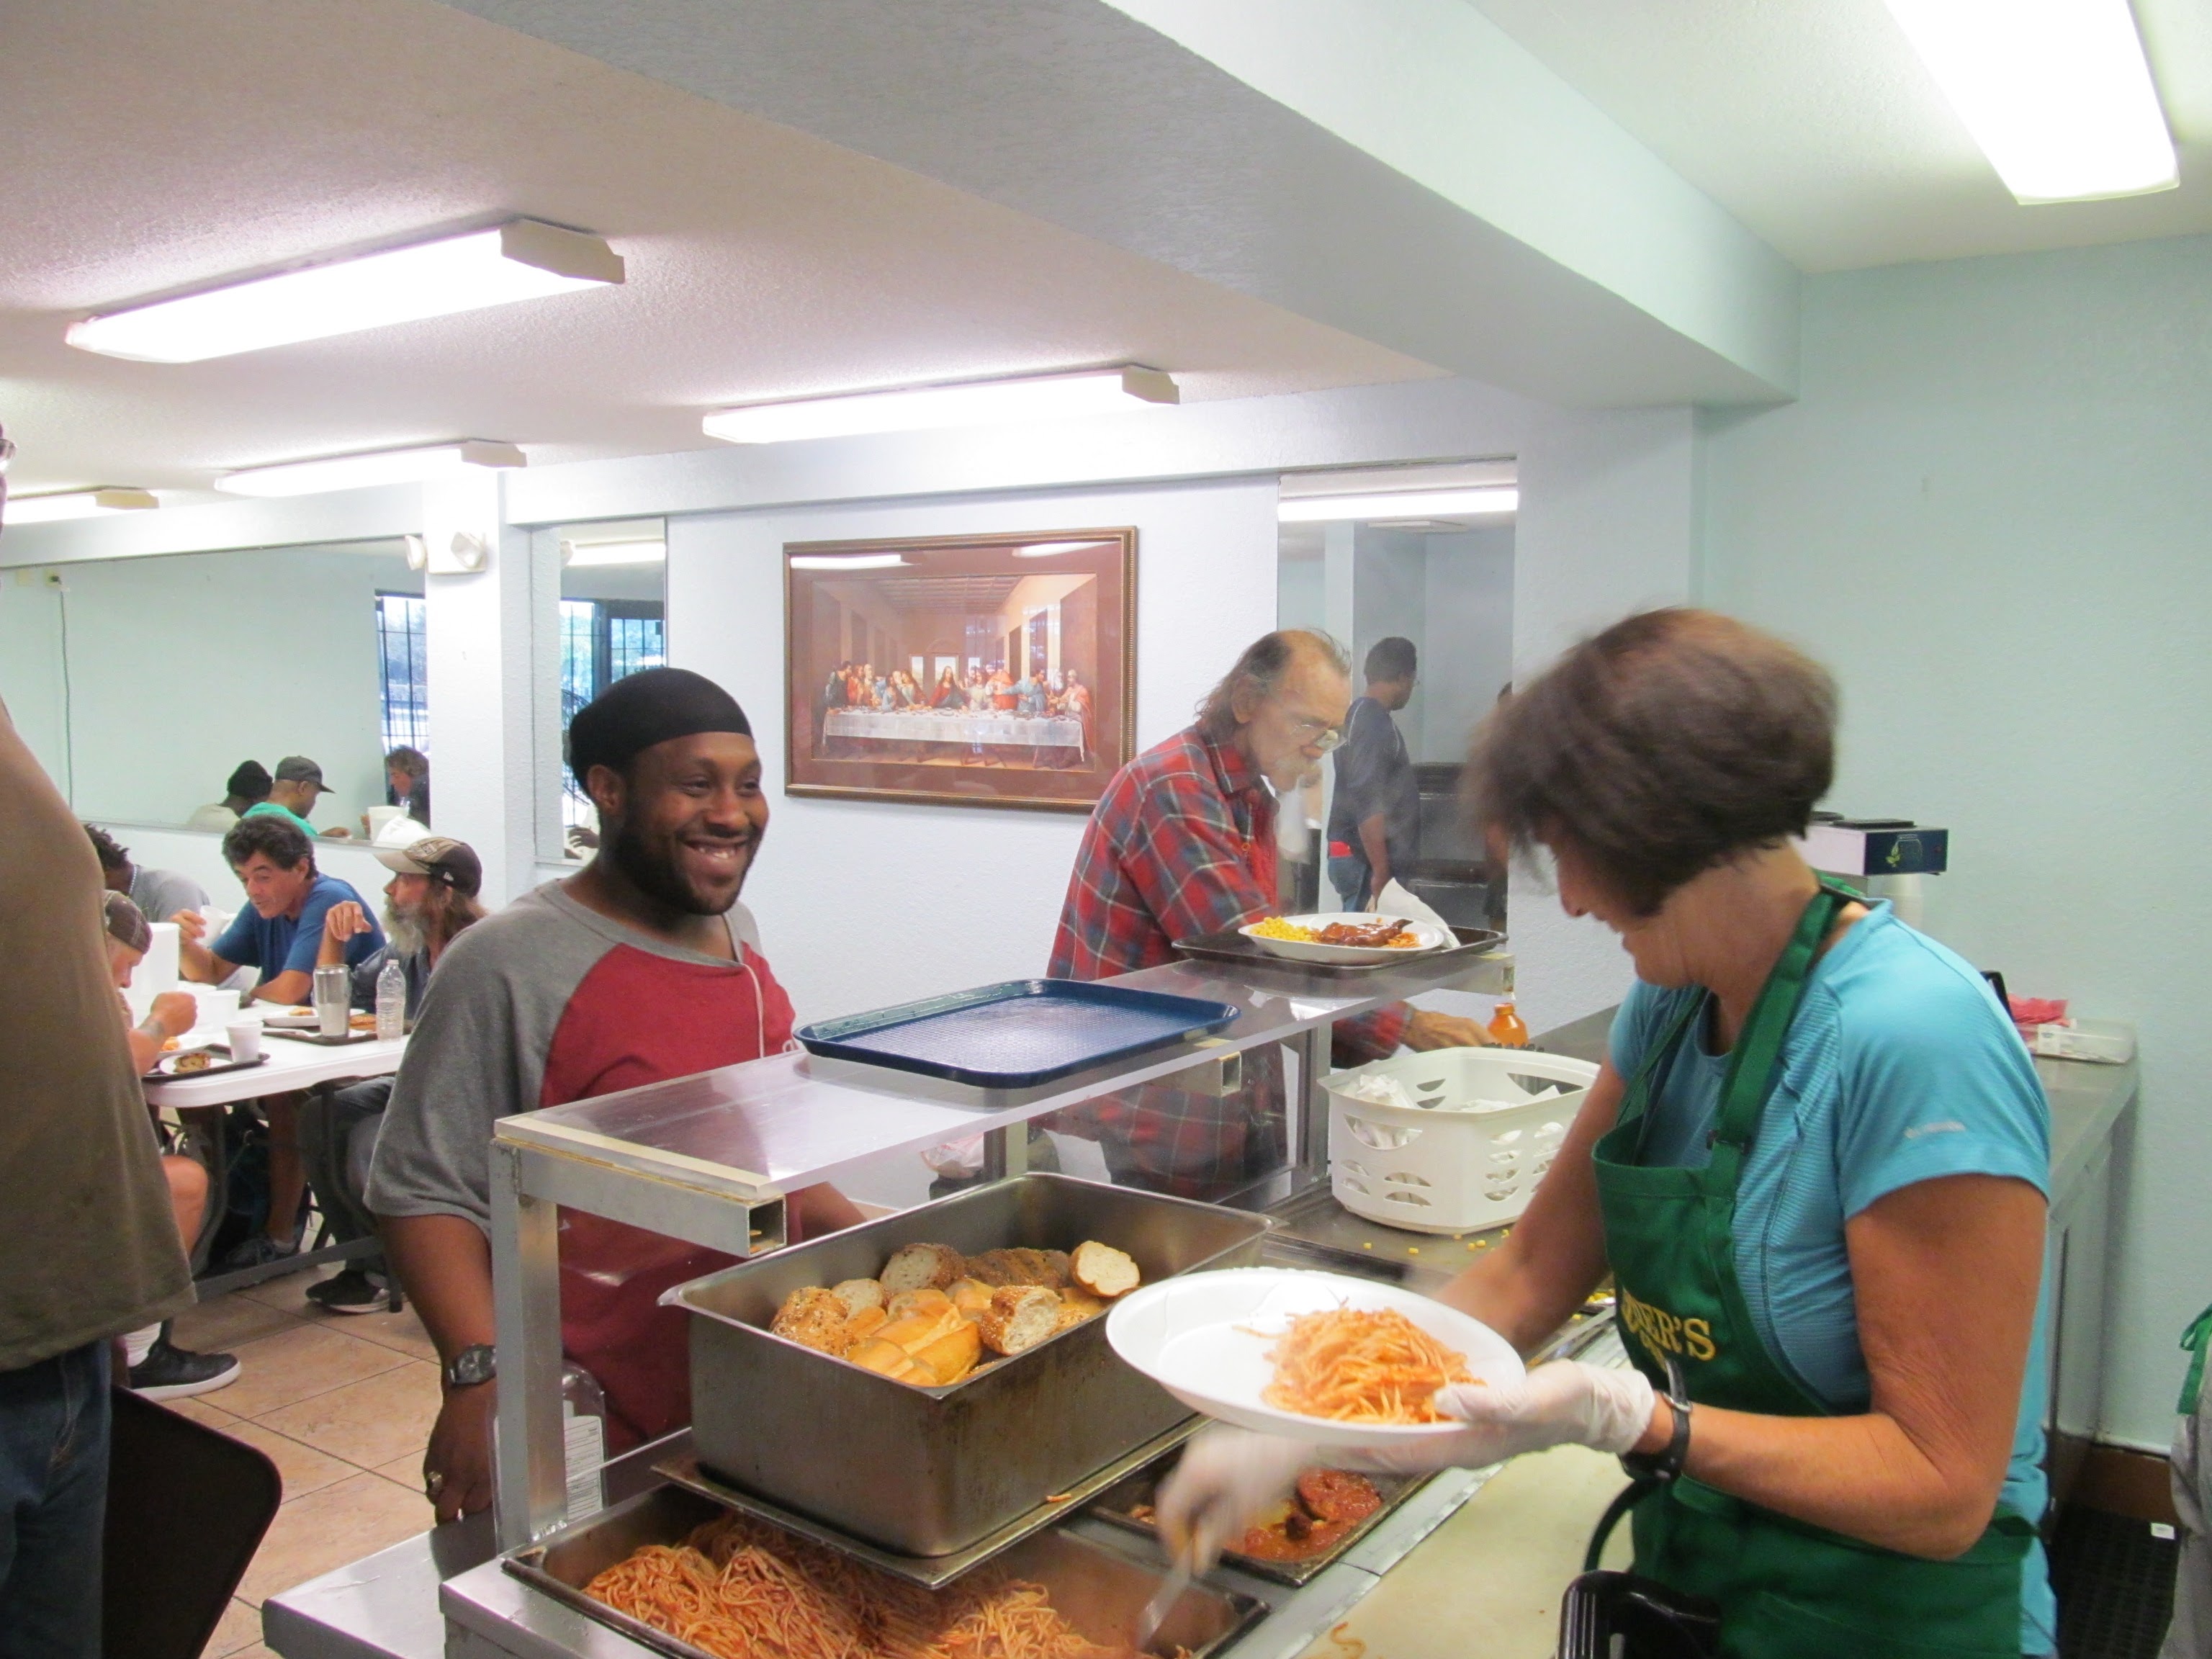 A homeless person getting free food at a soup kitchen.